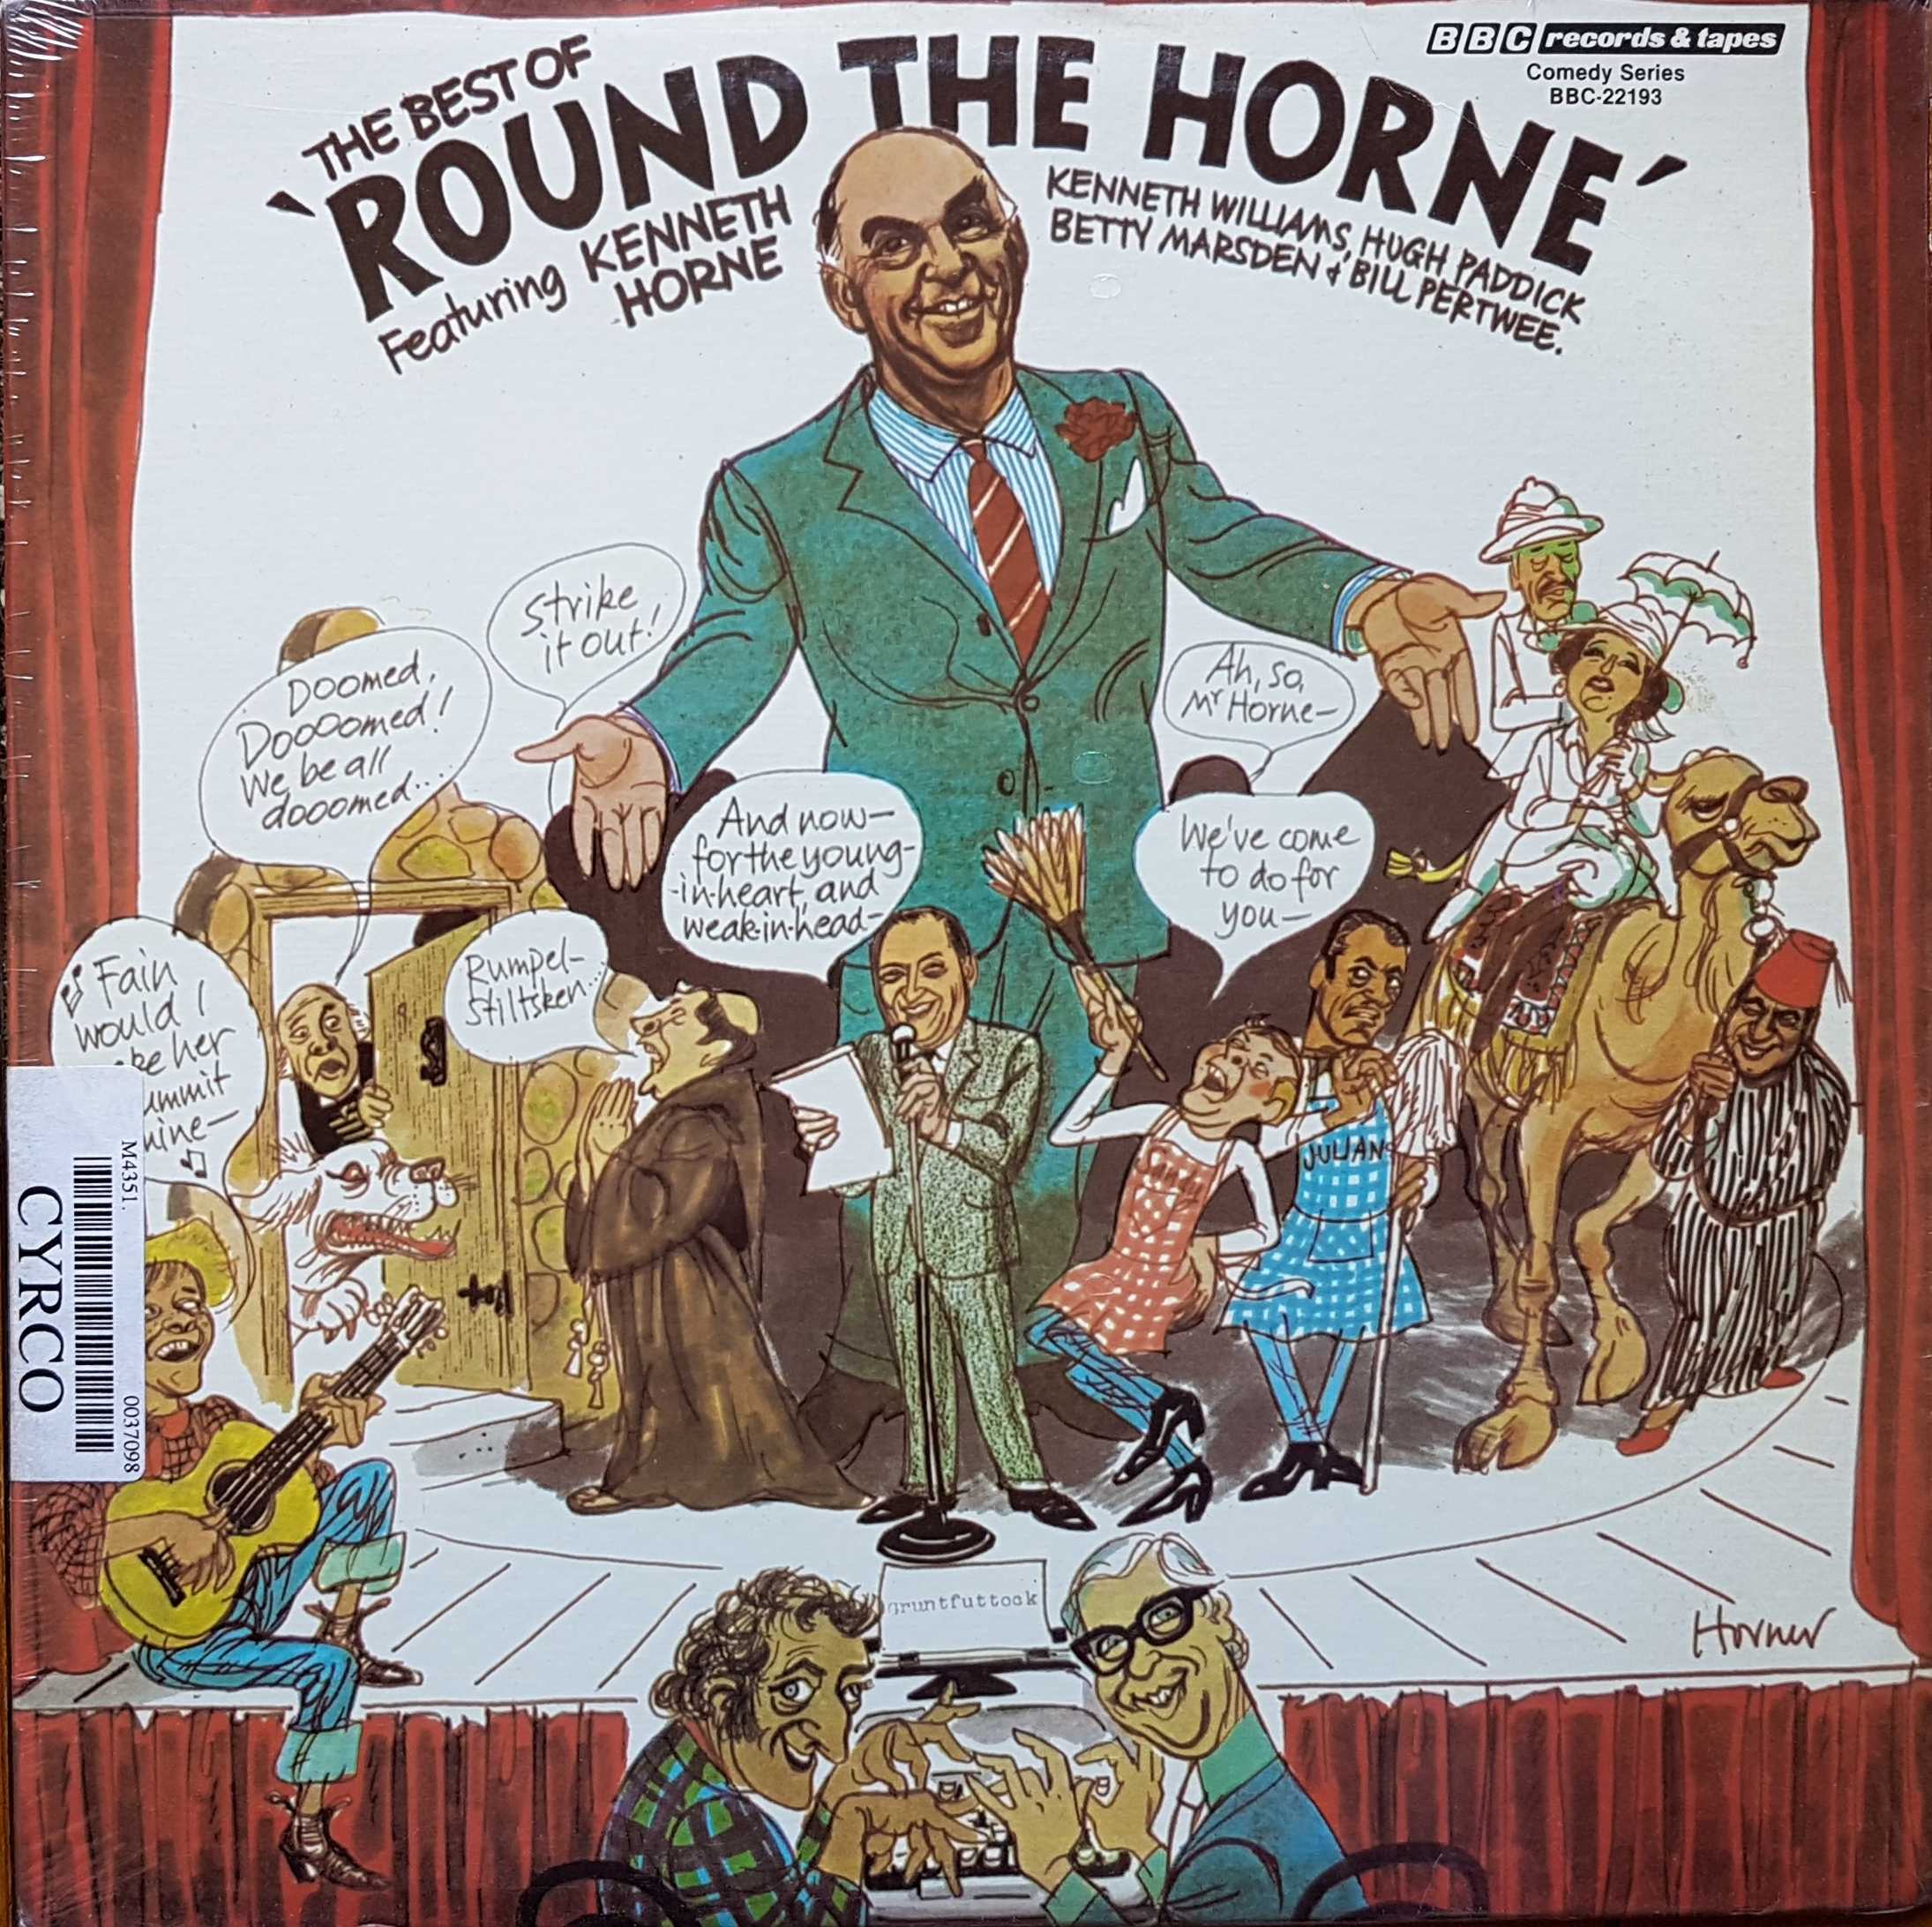 Picture of BBC - 22193 The best of round the Horne (US import) by artist Barry Took / Marty Feldman from the BBC albums - Records and Tapes library